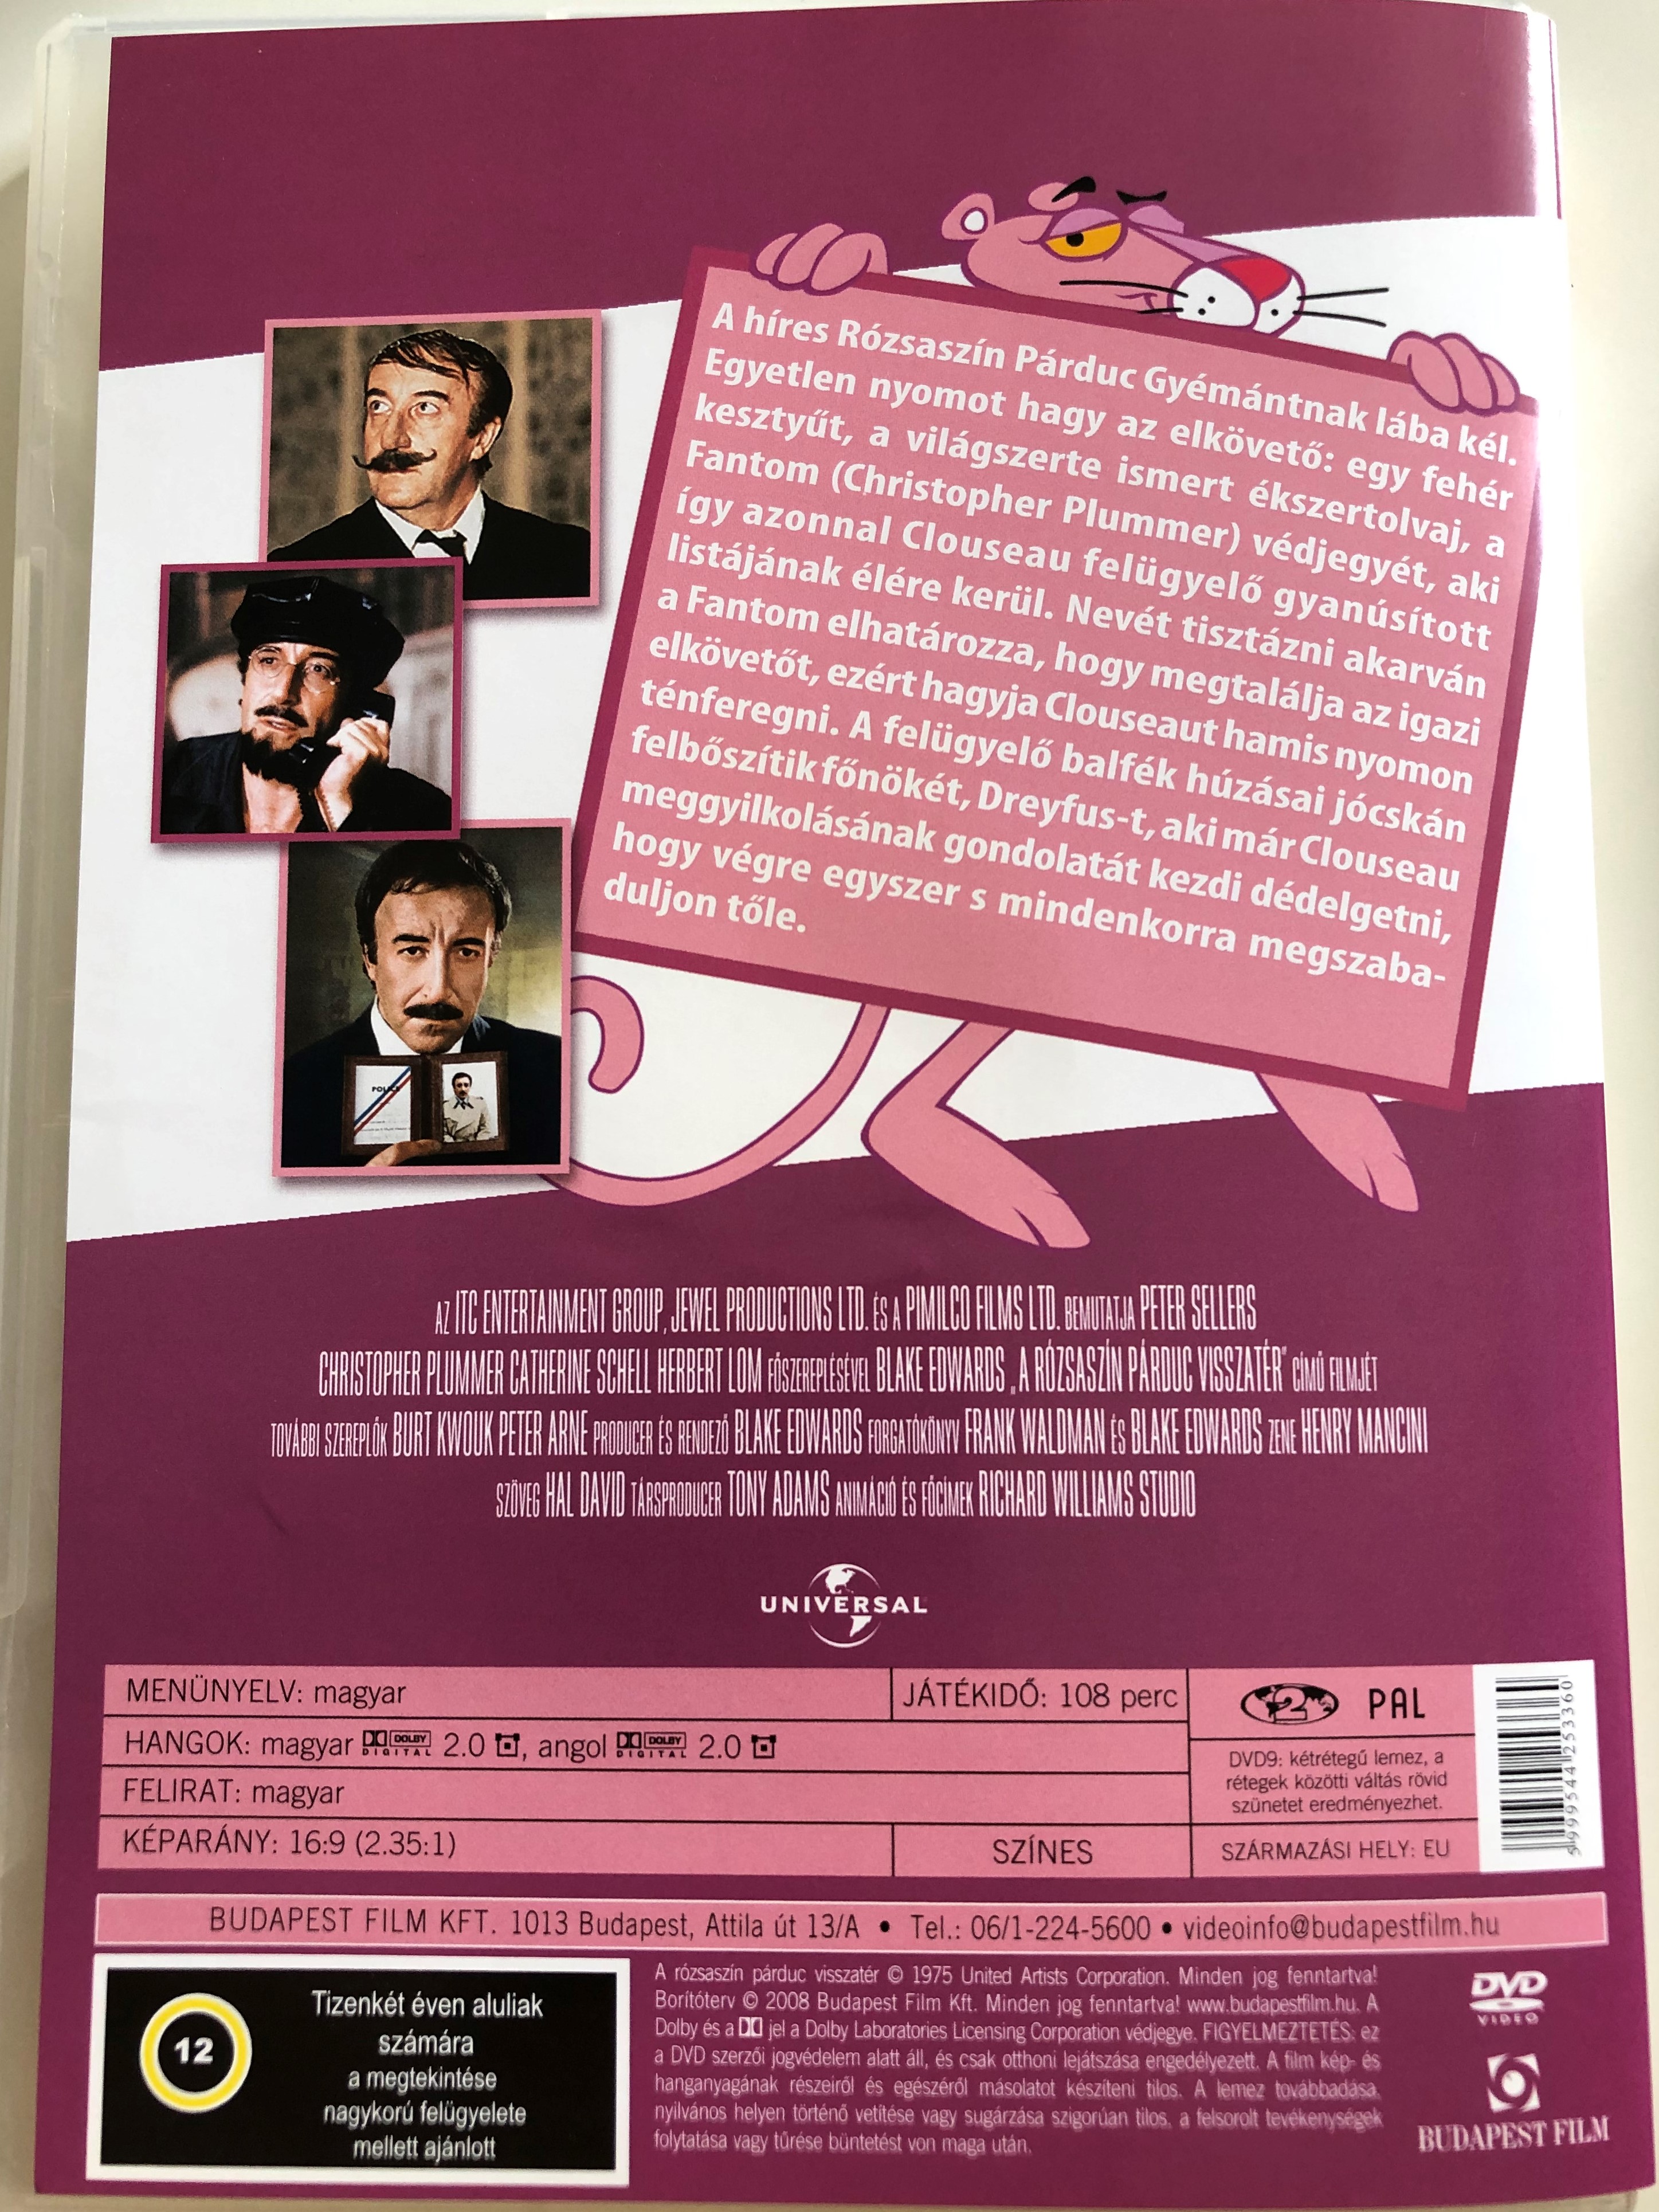 the-return-of-the-pink-panther-dvd-1975-a-r-zsasz-n-p-rduc-visszat-r-directed-by-blake-edwards-starring-peter-sellers-christopher-plummer-catherine-schell-herbert-lom-2-.jpg